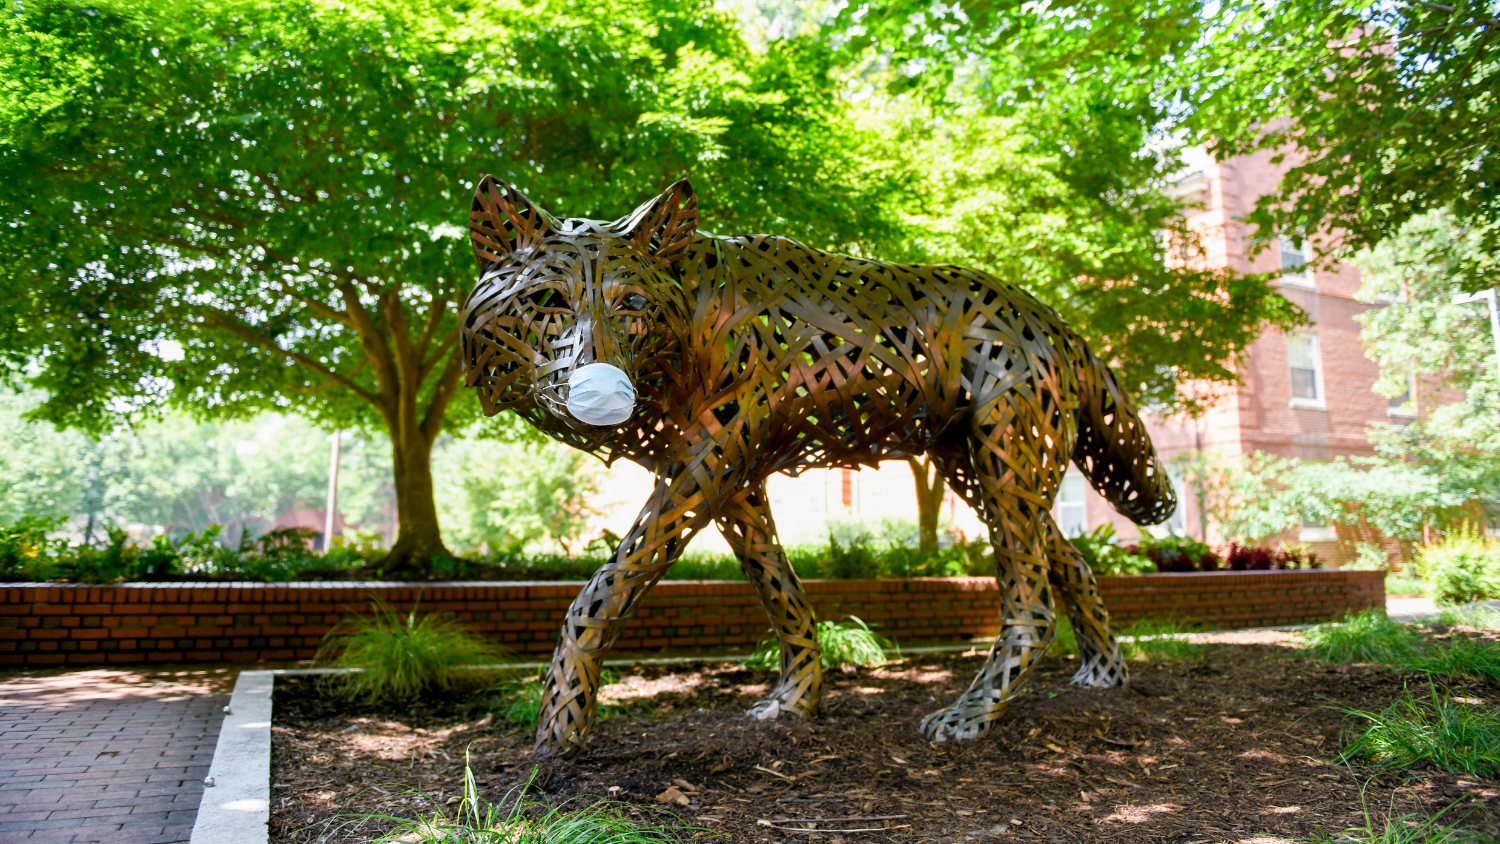 One of the copper wolves at Wolf Plaza wears a protective face mask during the COVID19 (COVID 19) pandemic.